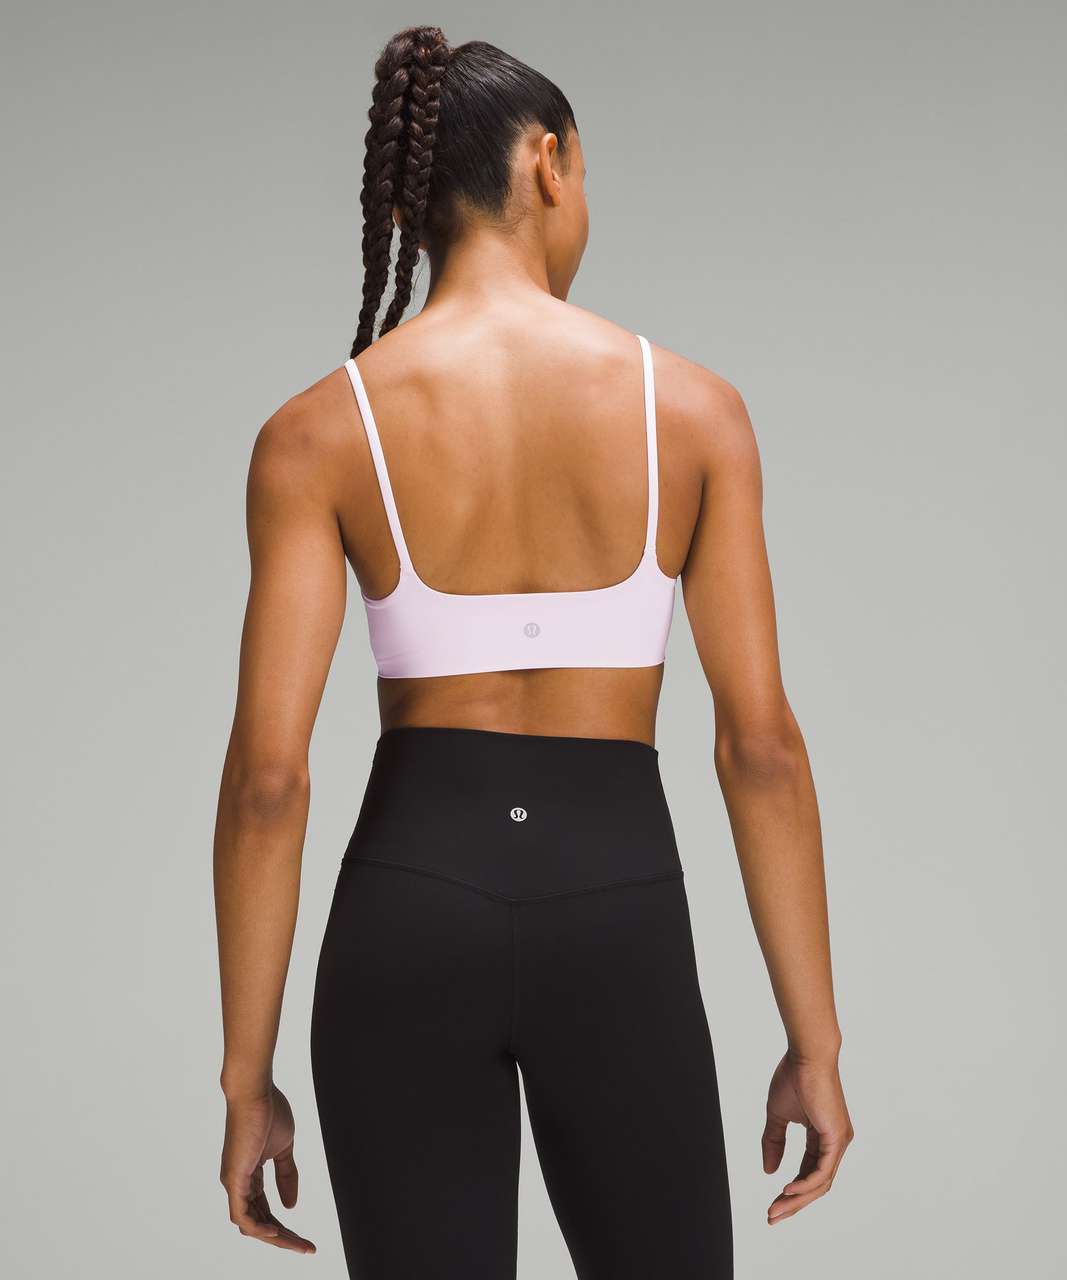 What bra do you recommend me using for this top? : r/lululemon